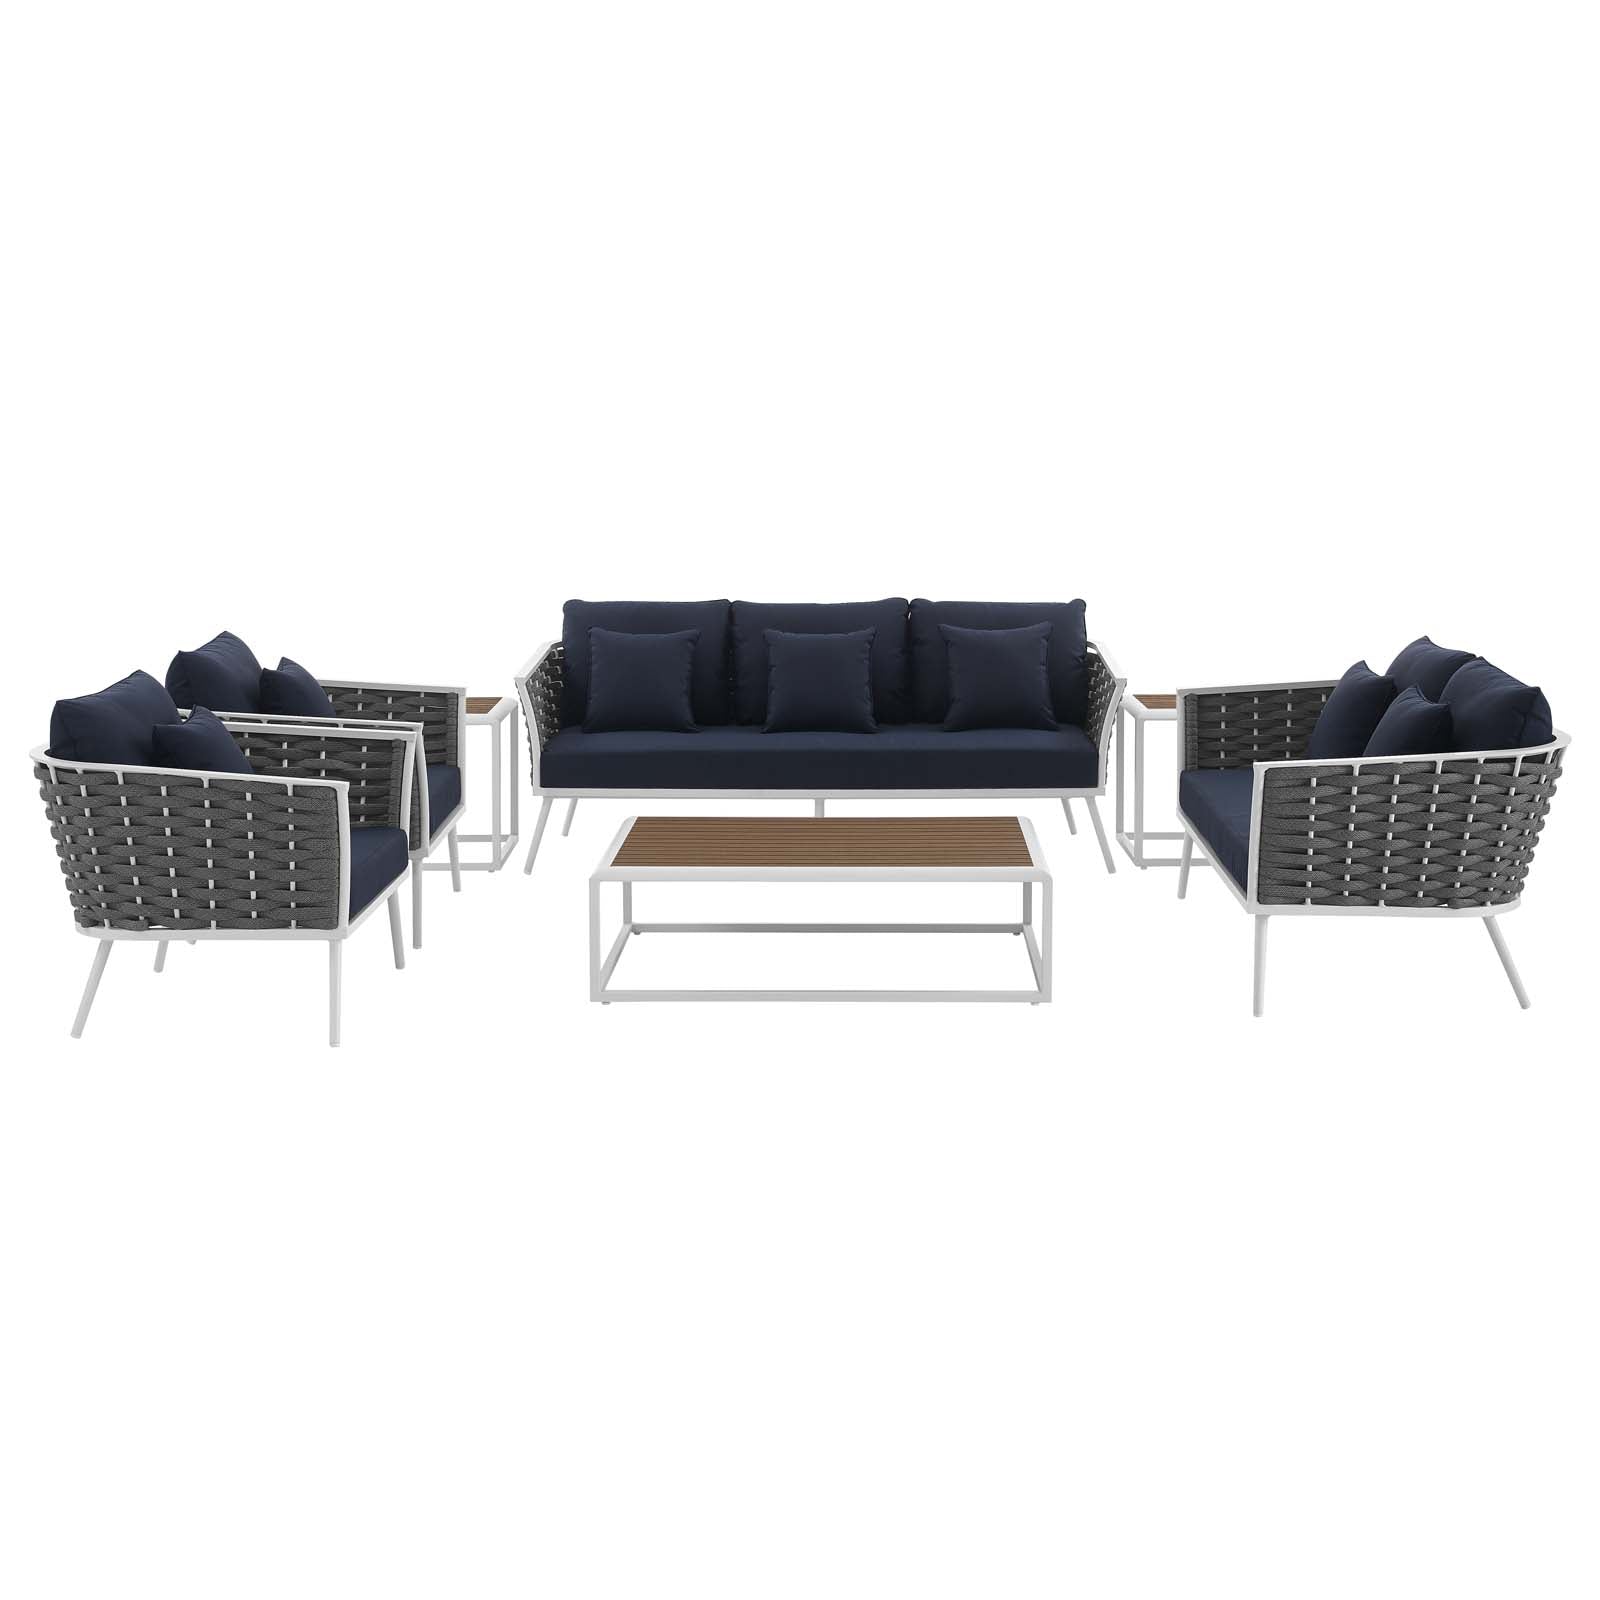 Stance 7 Piece Outdoor Patio Aluminum Sectional Sofa Set White Navy